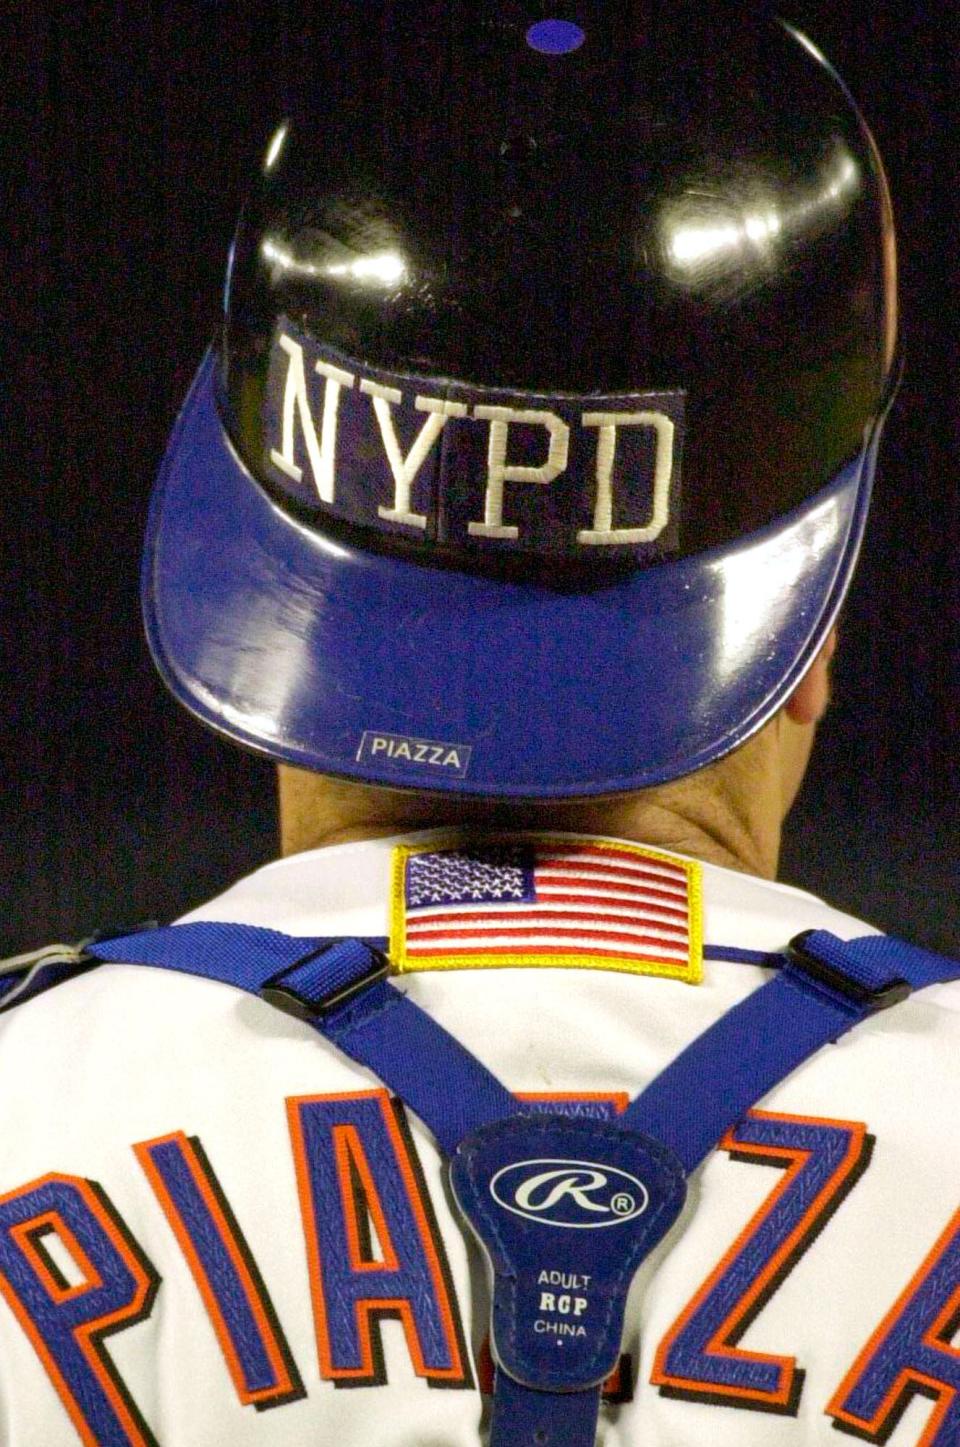 FILE - In this Sept. 21, 2001, file photo, New York Mets catcher Mike Piazza wears the NYPD logo on his helmet as he takes the field in the top of the fifth inning against the Atlanta Braves in New York. Sports teams will hold ceremonies Saturday, Sept.11, 2021, to mark the 20th anniversary of the Sept. 11 terrorist attacks. (AP Photo/Mark Lennihan, File)